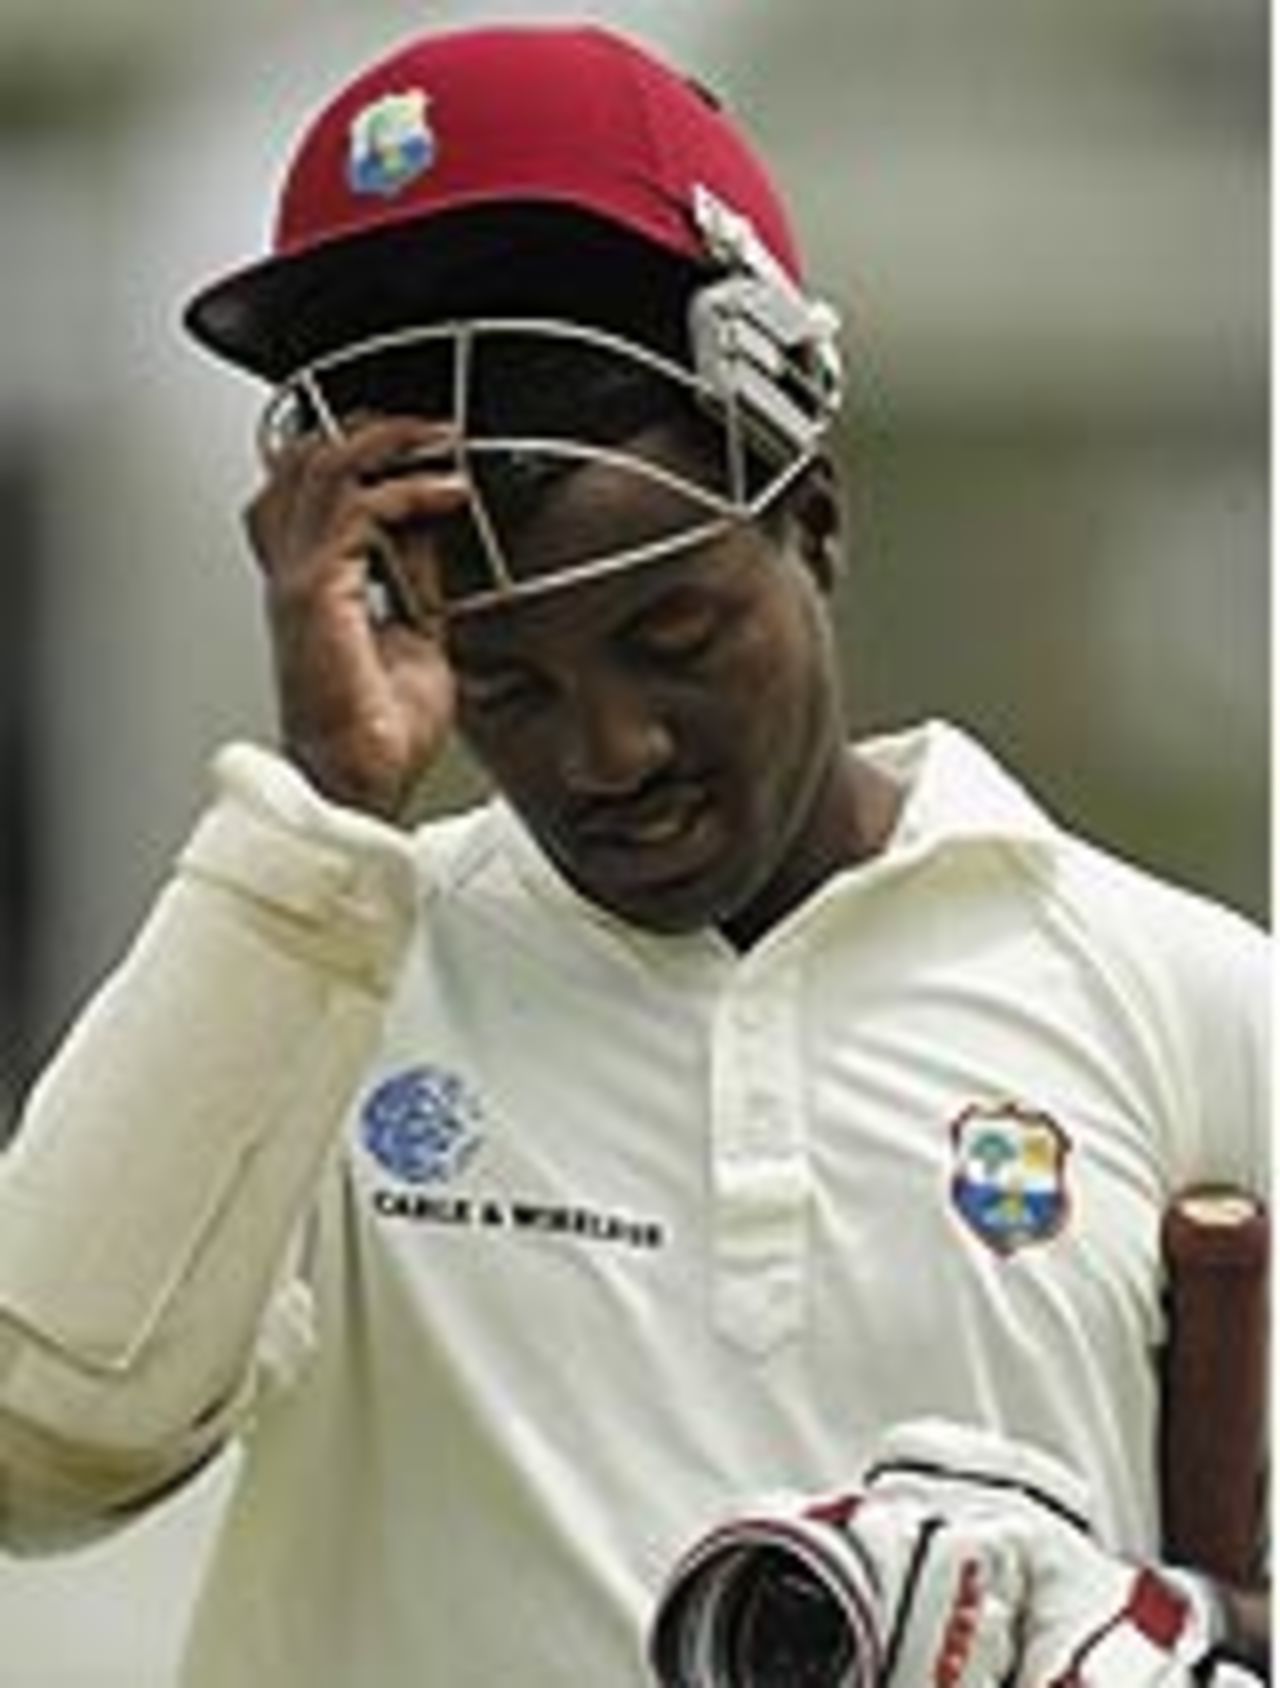 Brian Lara of the West Indies leaves the field after being dismissed, West Indies v Australia, 4th Test, Antigua, 2nd day, May 10, 2003